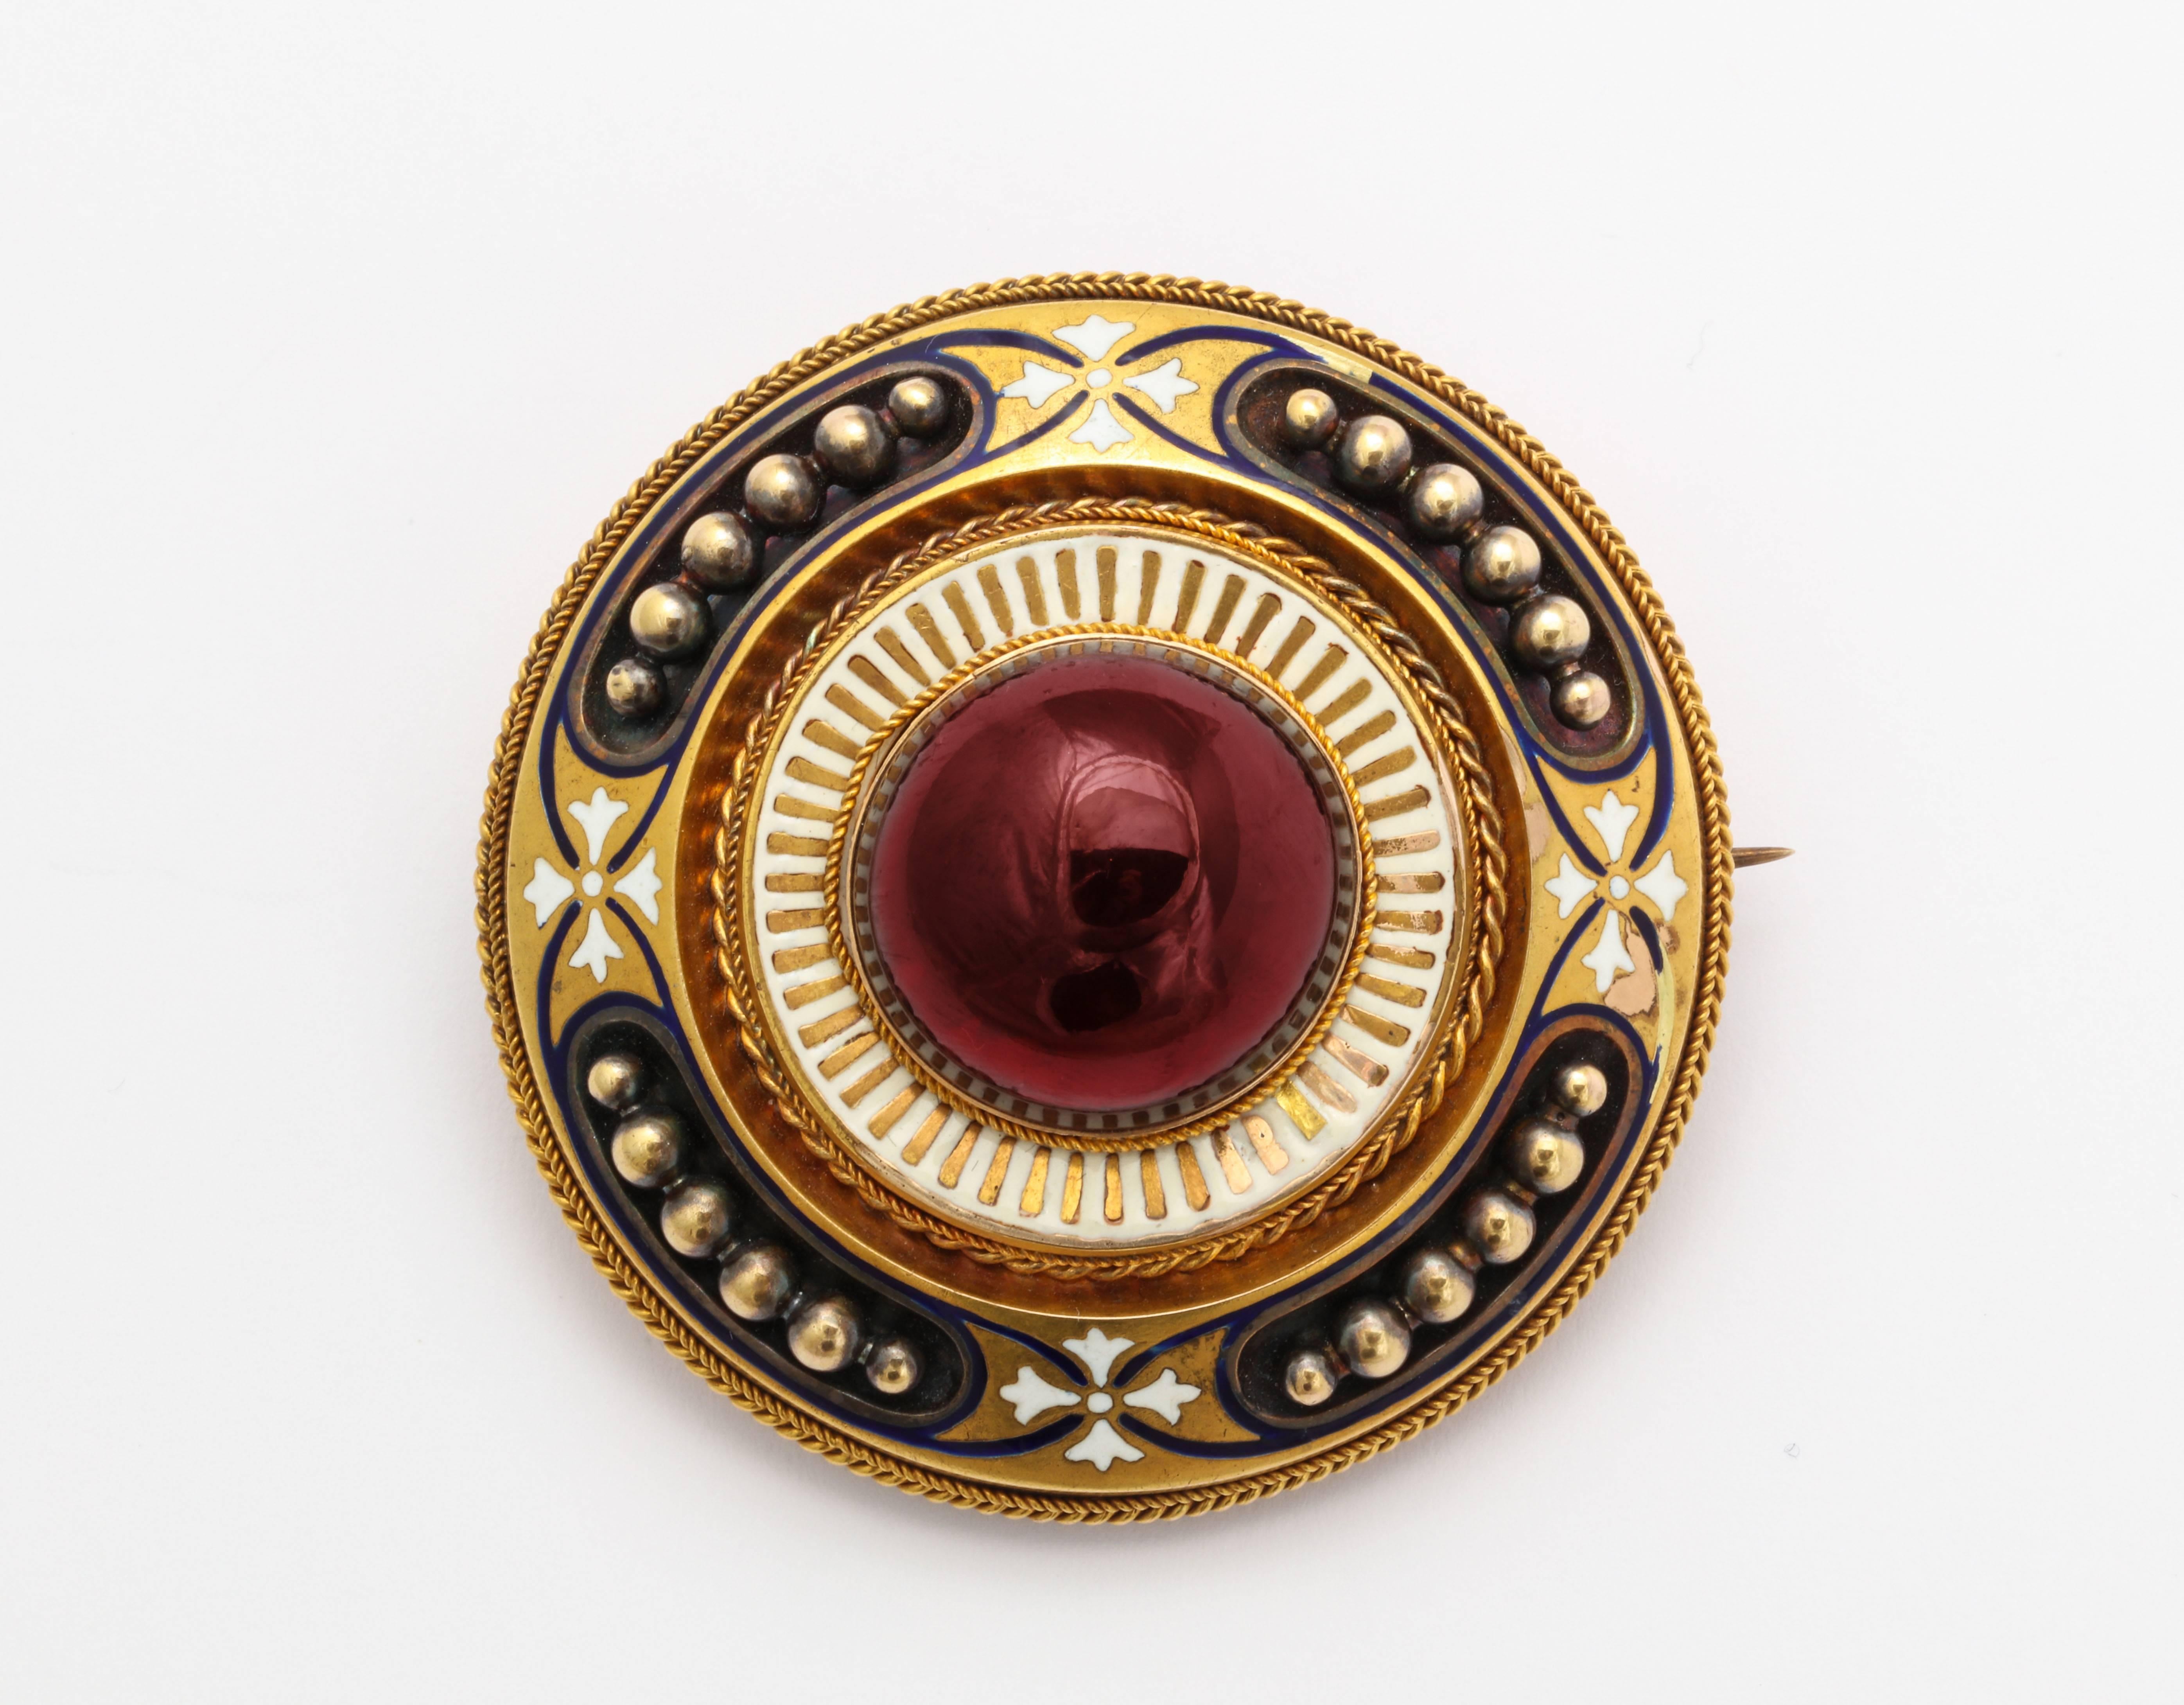 A superb brooch of museum quality is brilliant with a glowing cabochon garnet surrounded by white and gold enamel and a locket in the back. The gold rays light the center and push the garnet to the fore. The brooch measures 2 inches in diameter. All